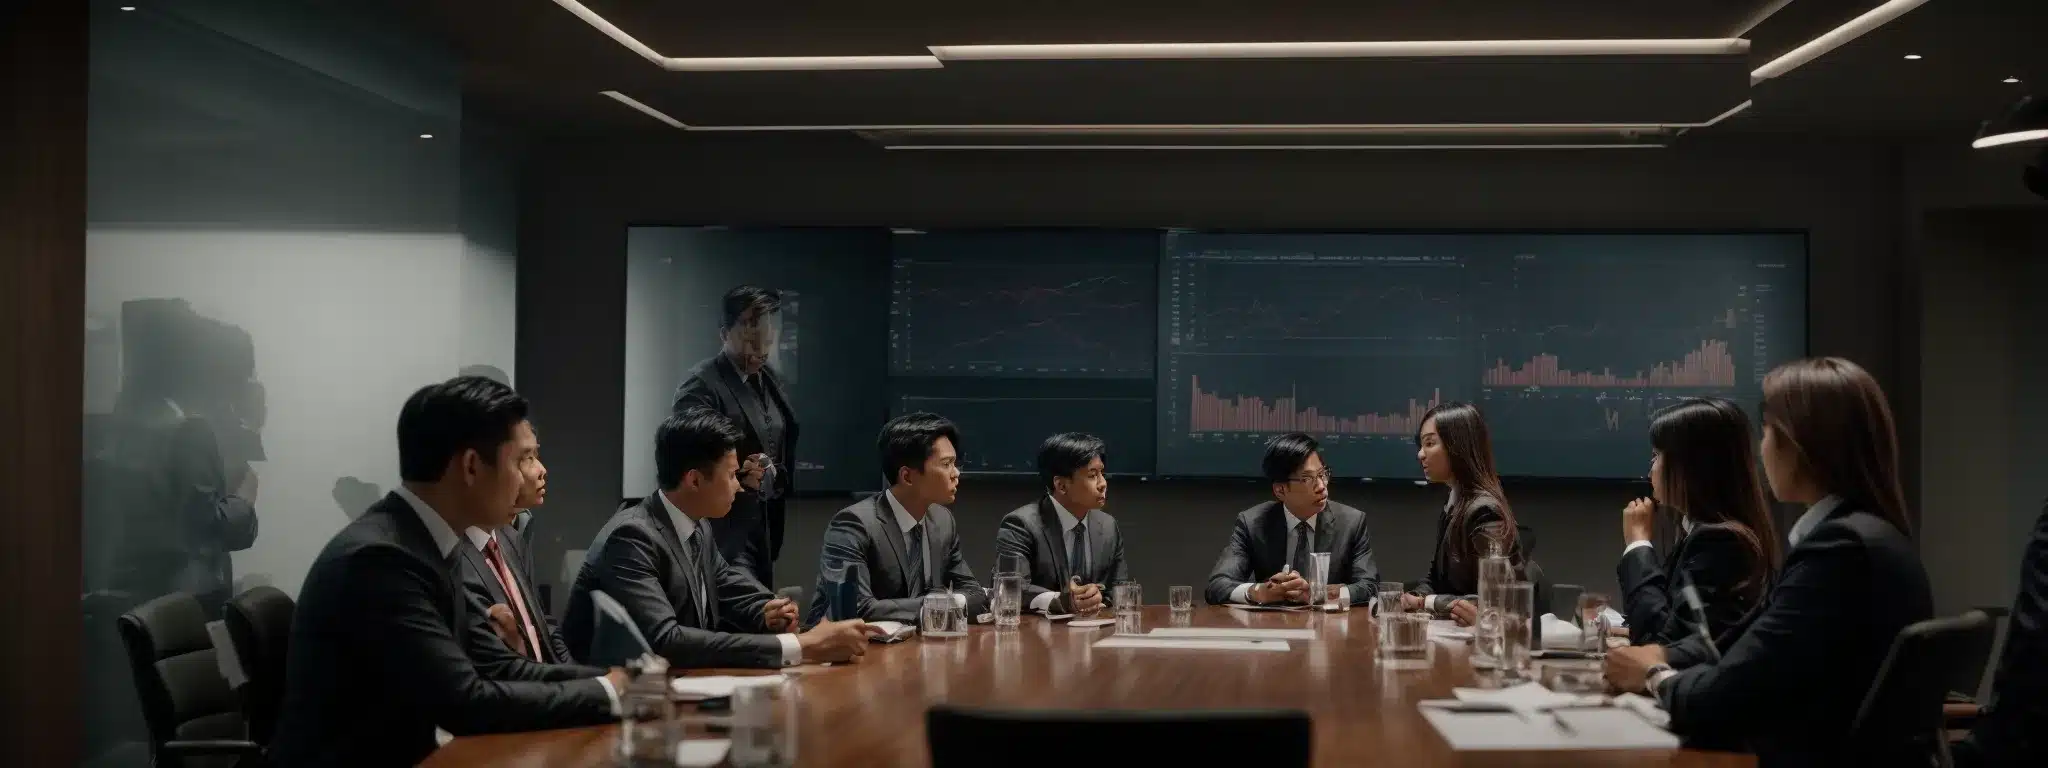 A Boardroom Meeting In Progress With Marketing Professionals Discussing Strategies Around A Table With Graphs And Charts Displayed On A Screen.